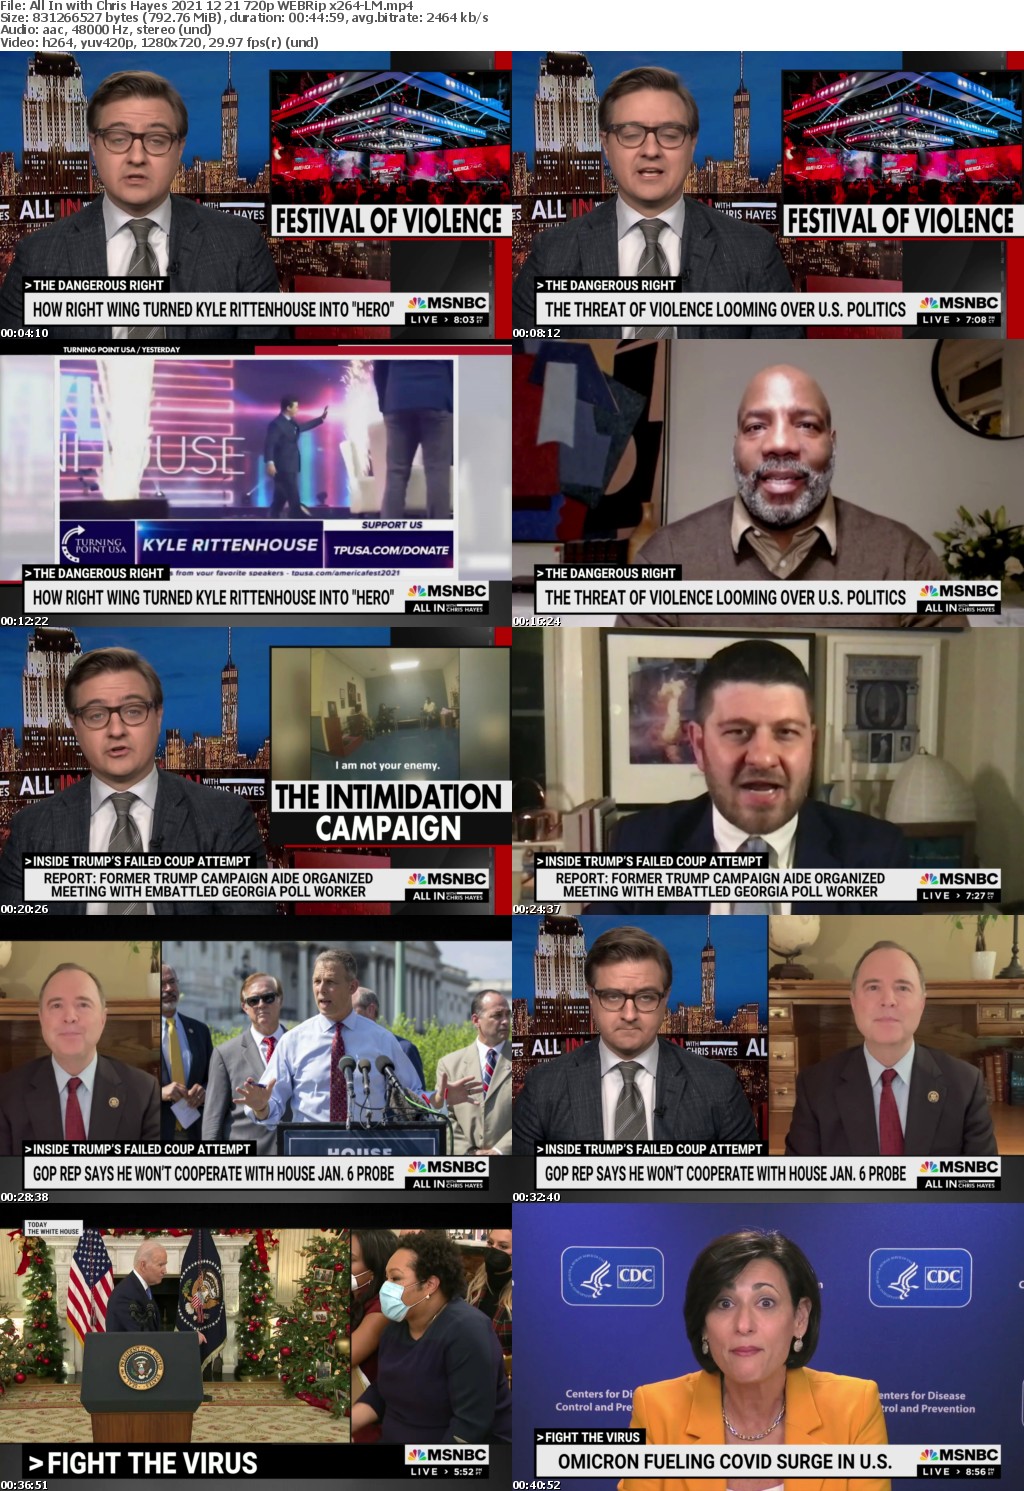 All In with Chris Hayes 2021 12 21 720p WEBRip x264-LM